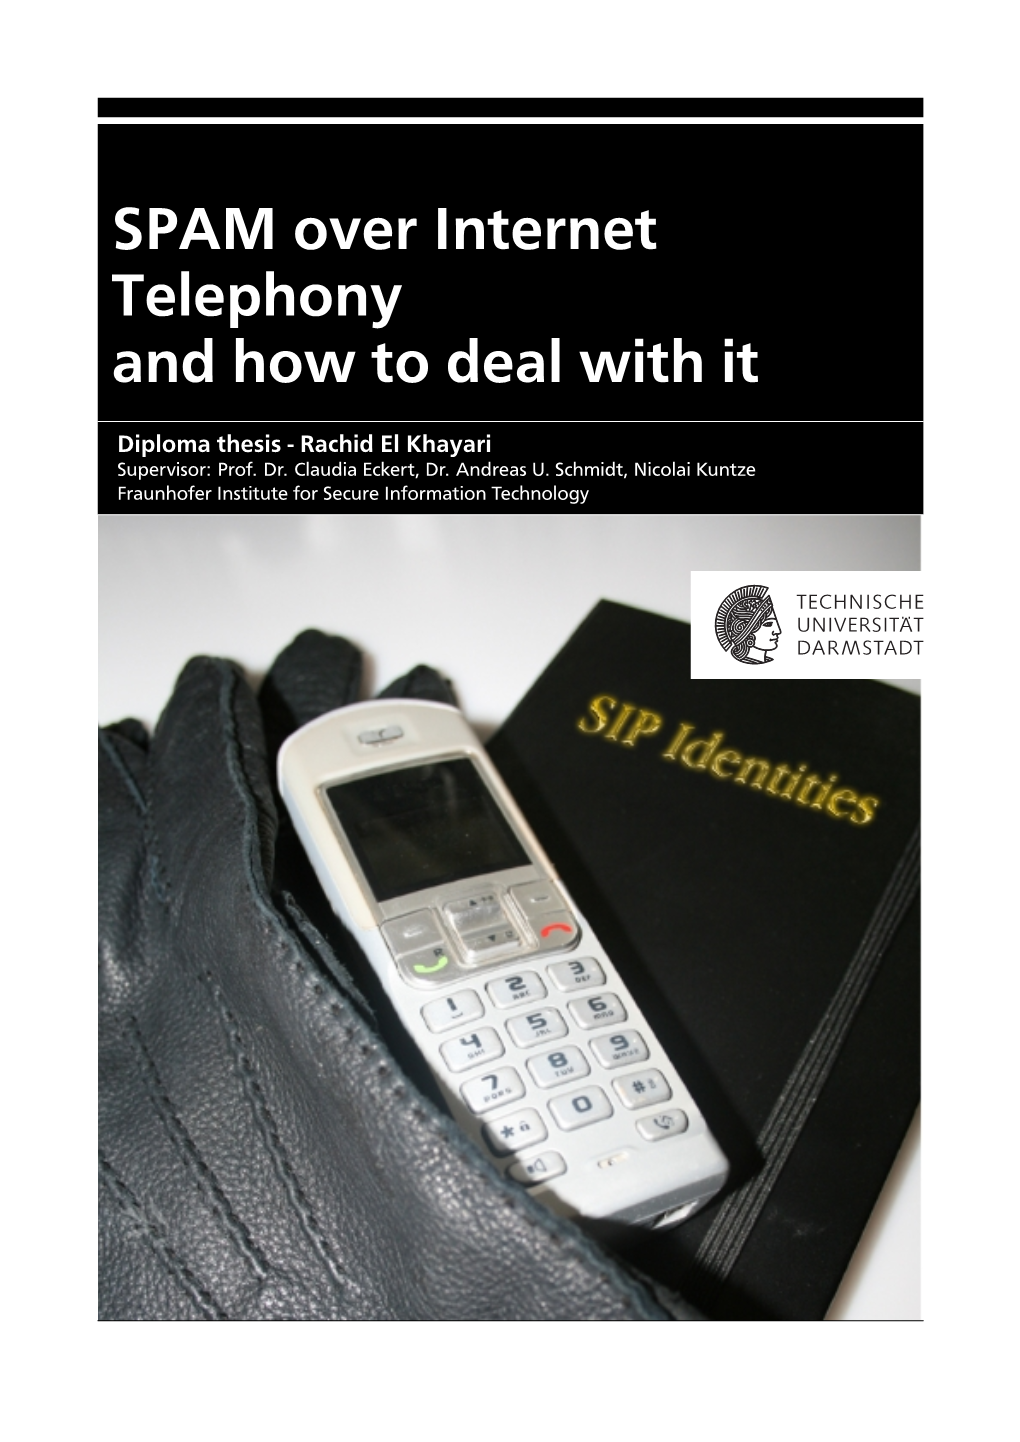 SPAM Over Internet Telephony and How to Deal with It